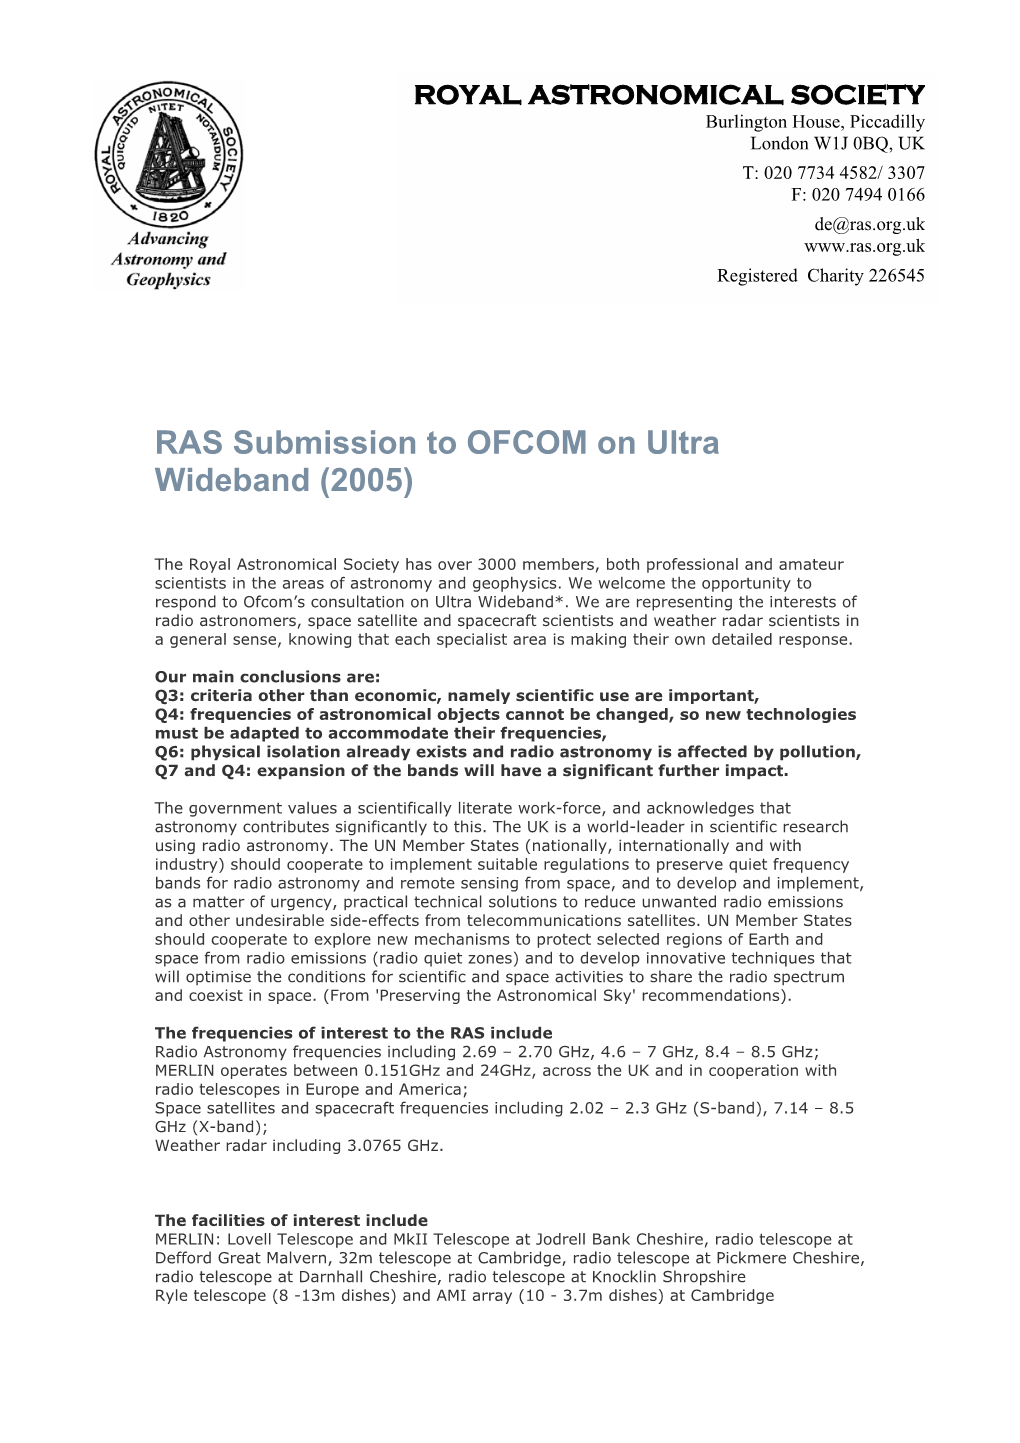 RAS Submission to OFCOM on Ultra Wideband (2005)